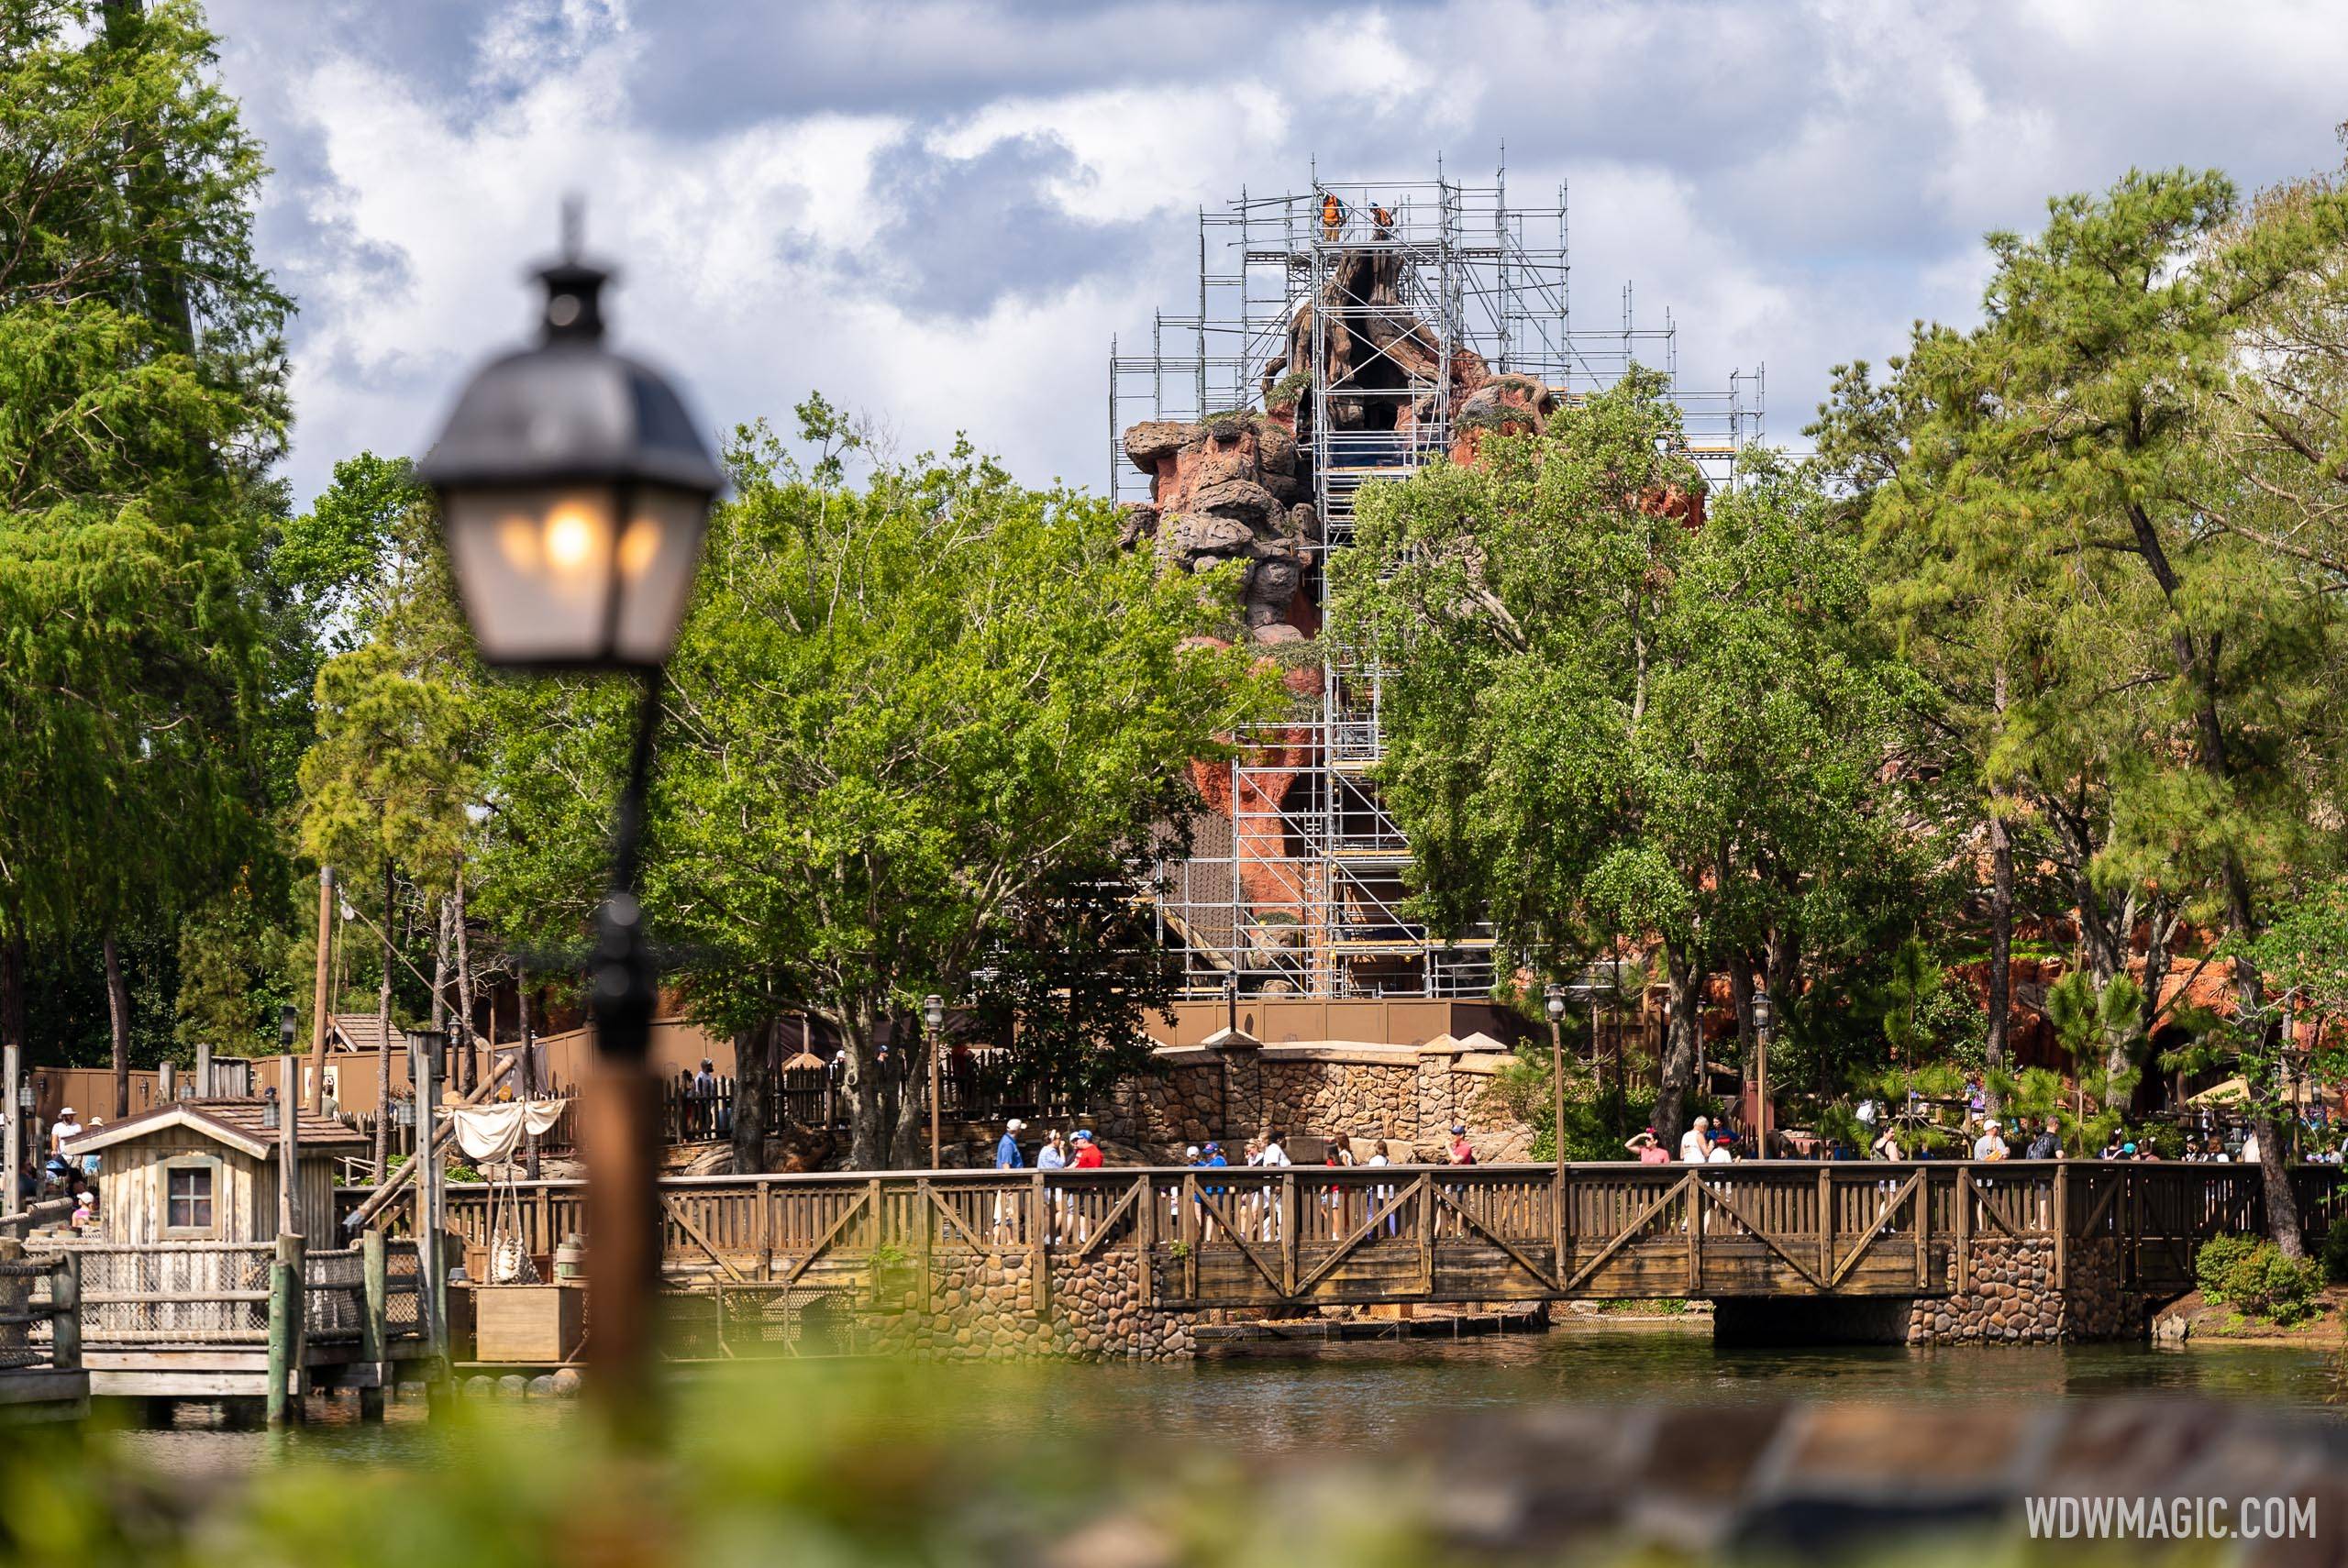 Top of the tree lopped from the former Splash Mountain as work continues on Tiana's Bayou Adventure